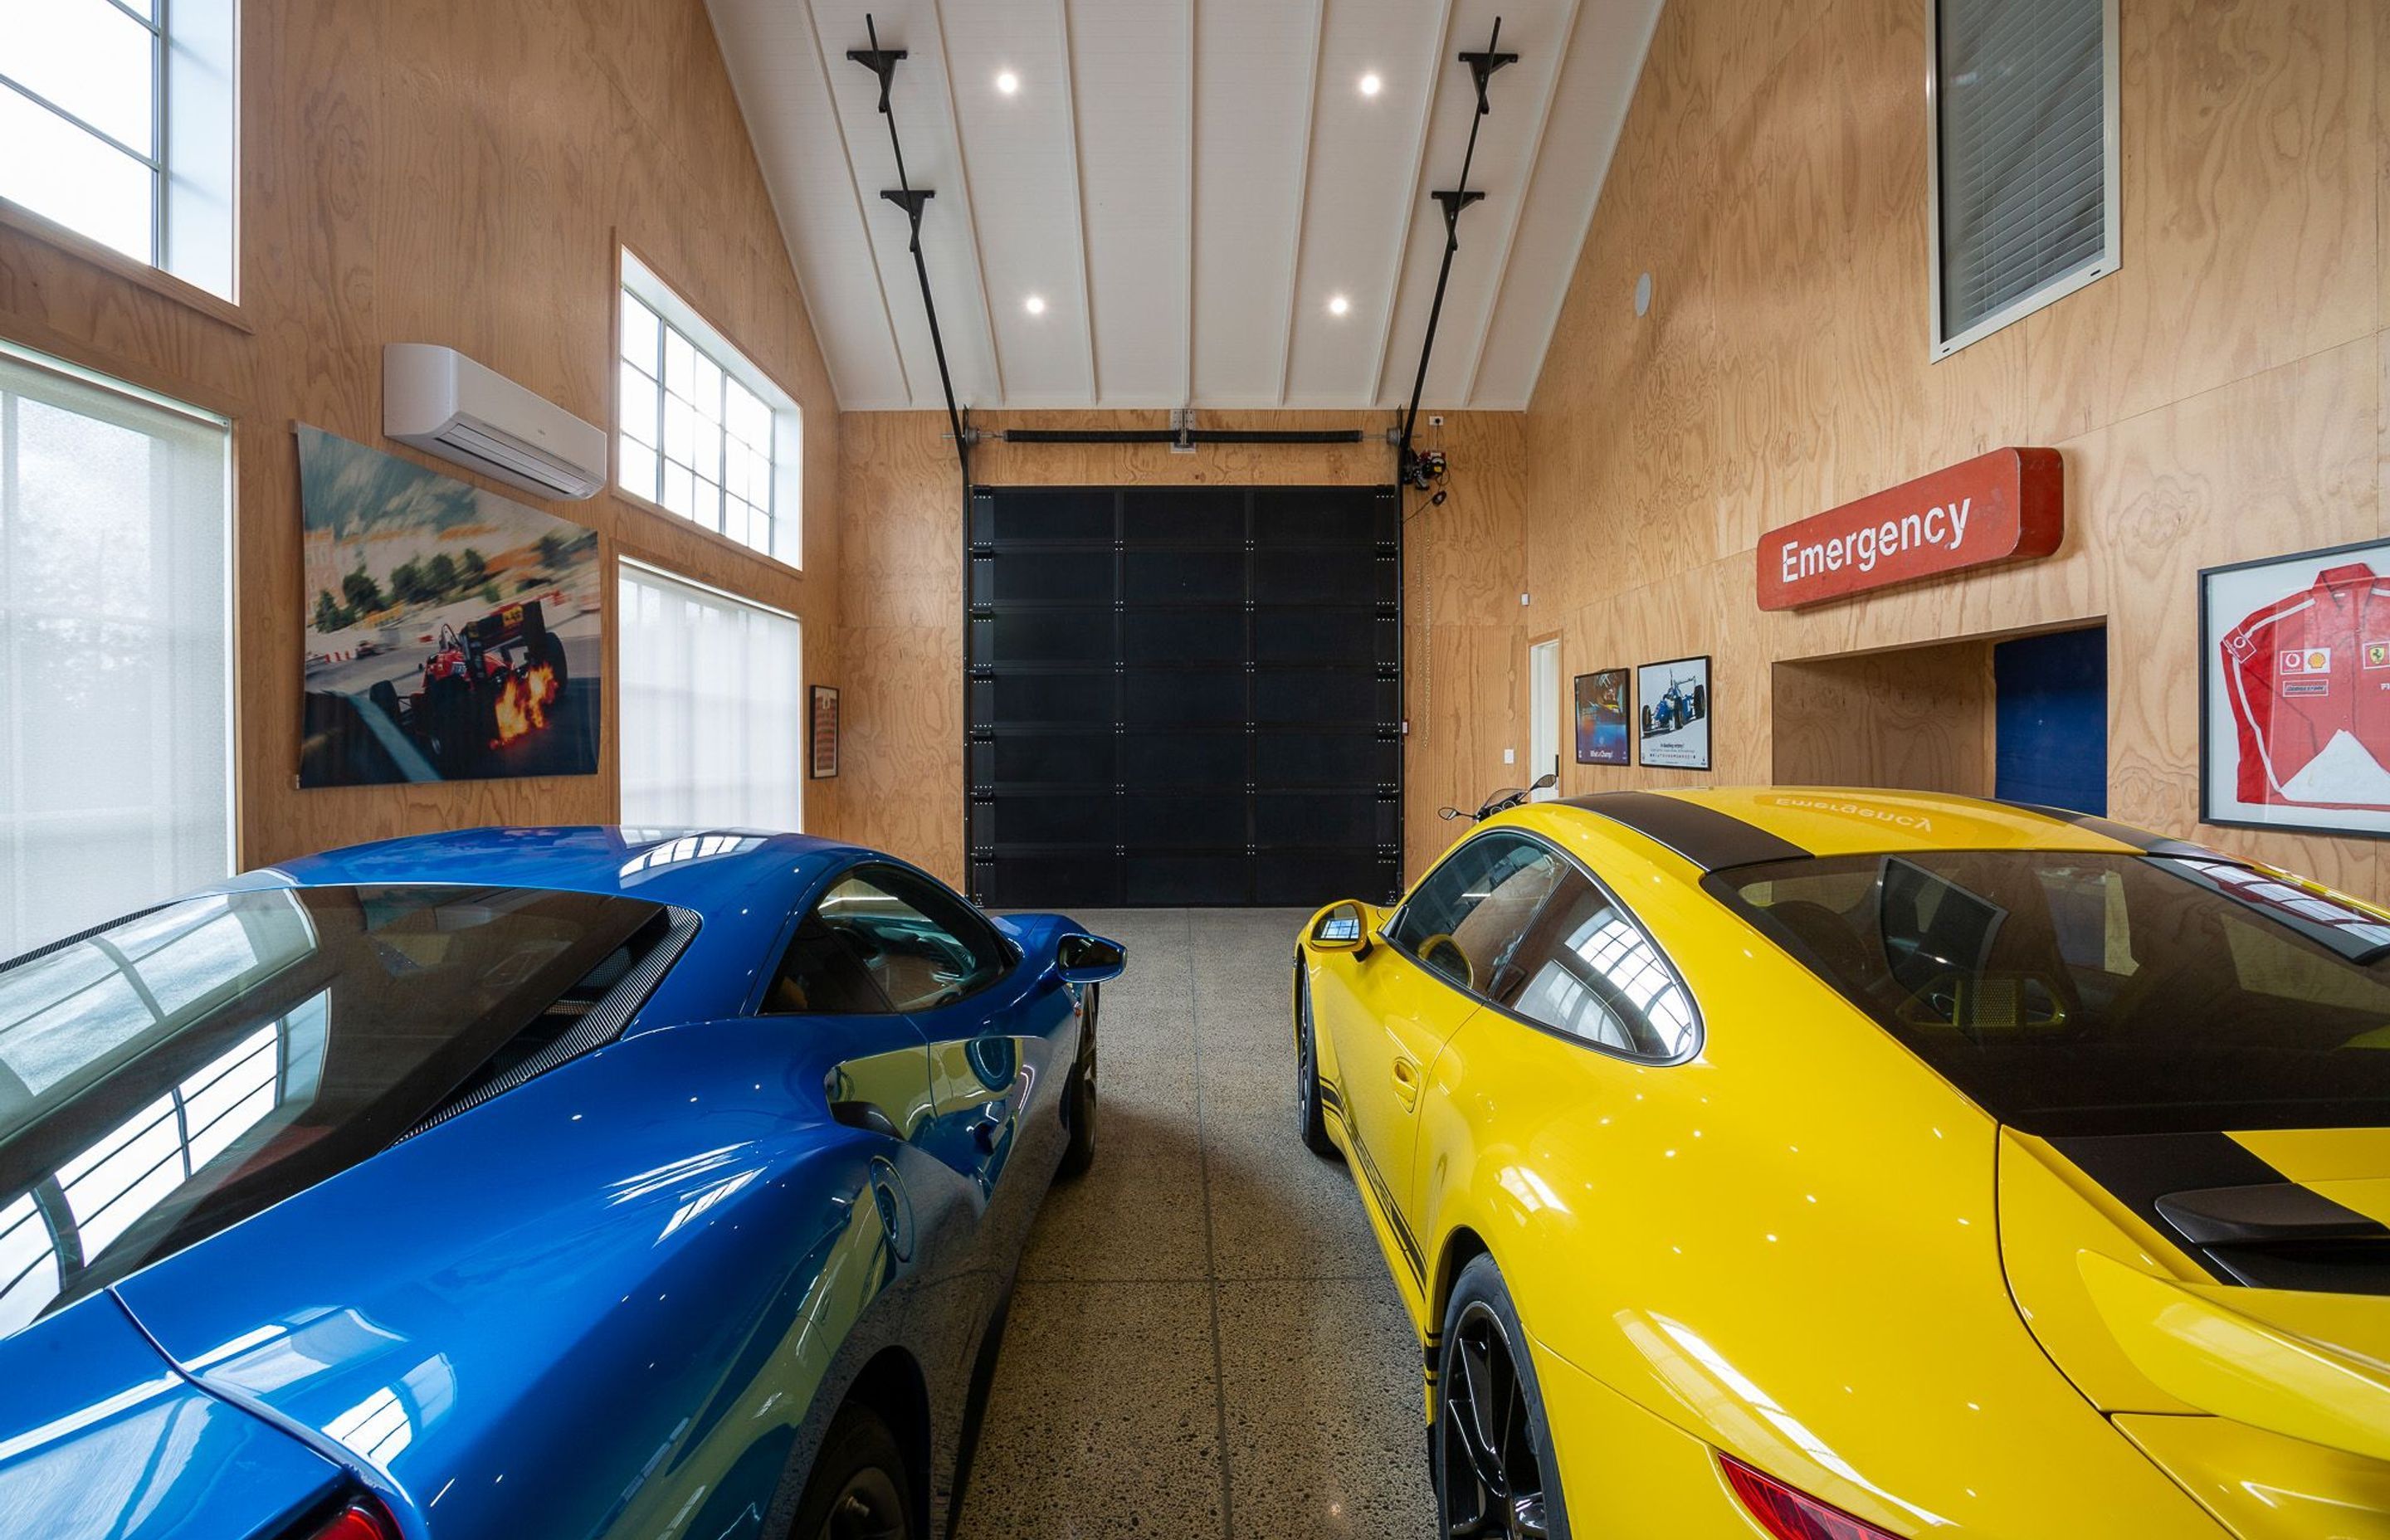 The entrance to the garage.